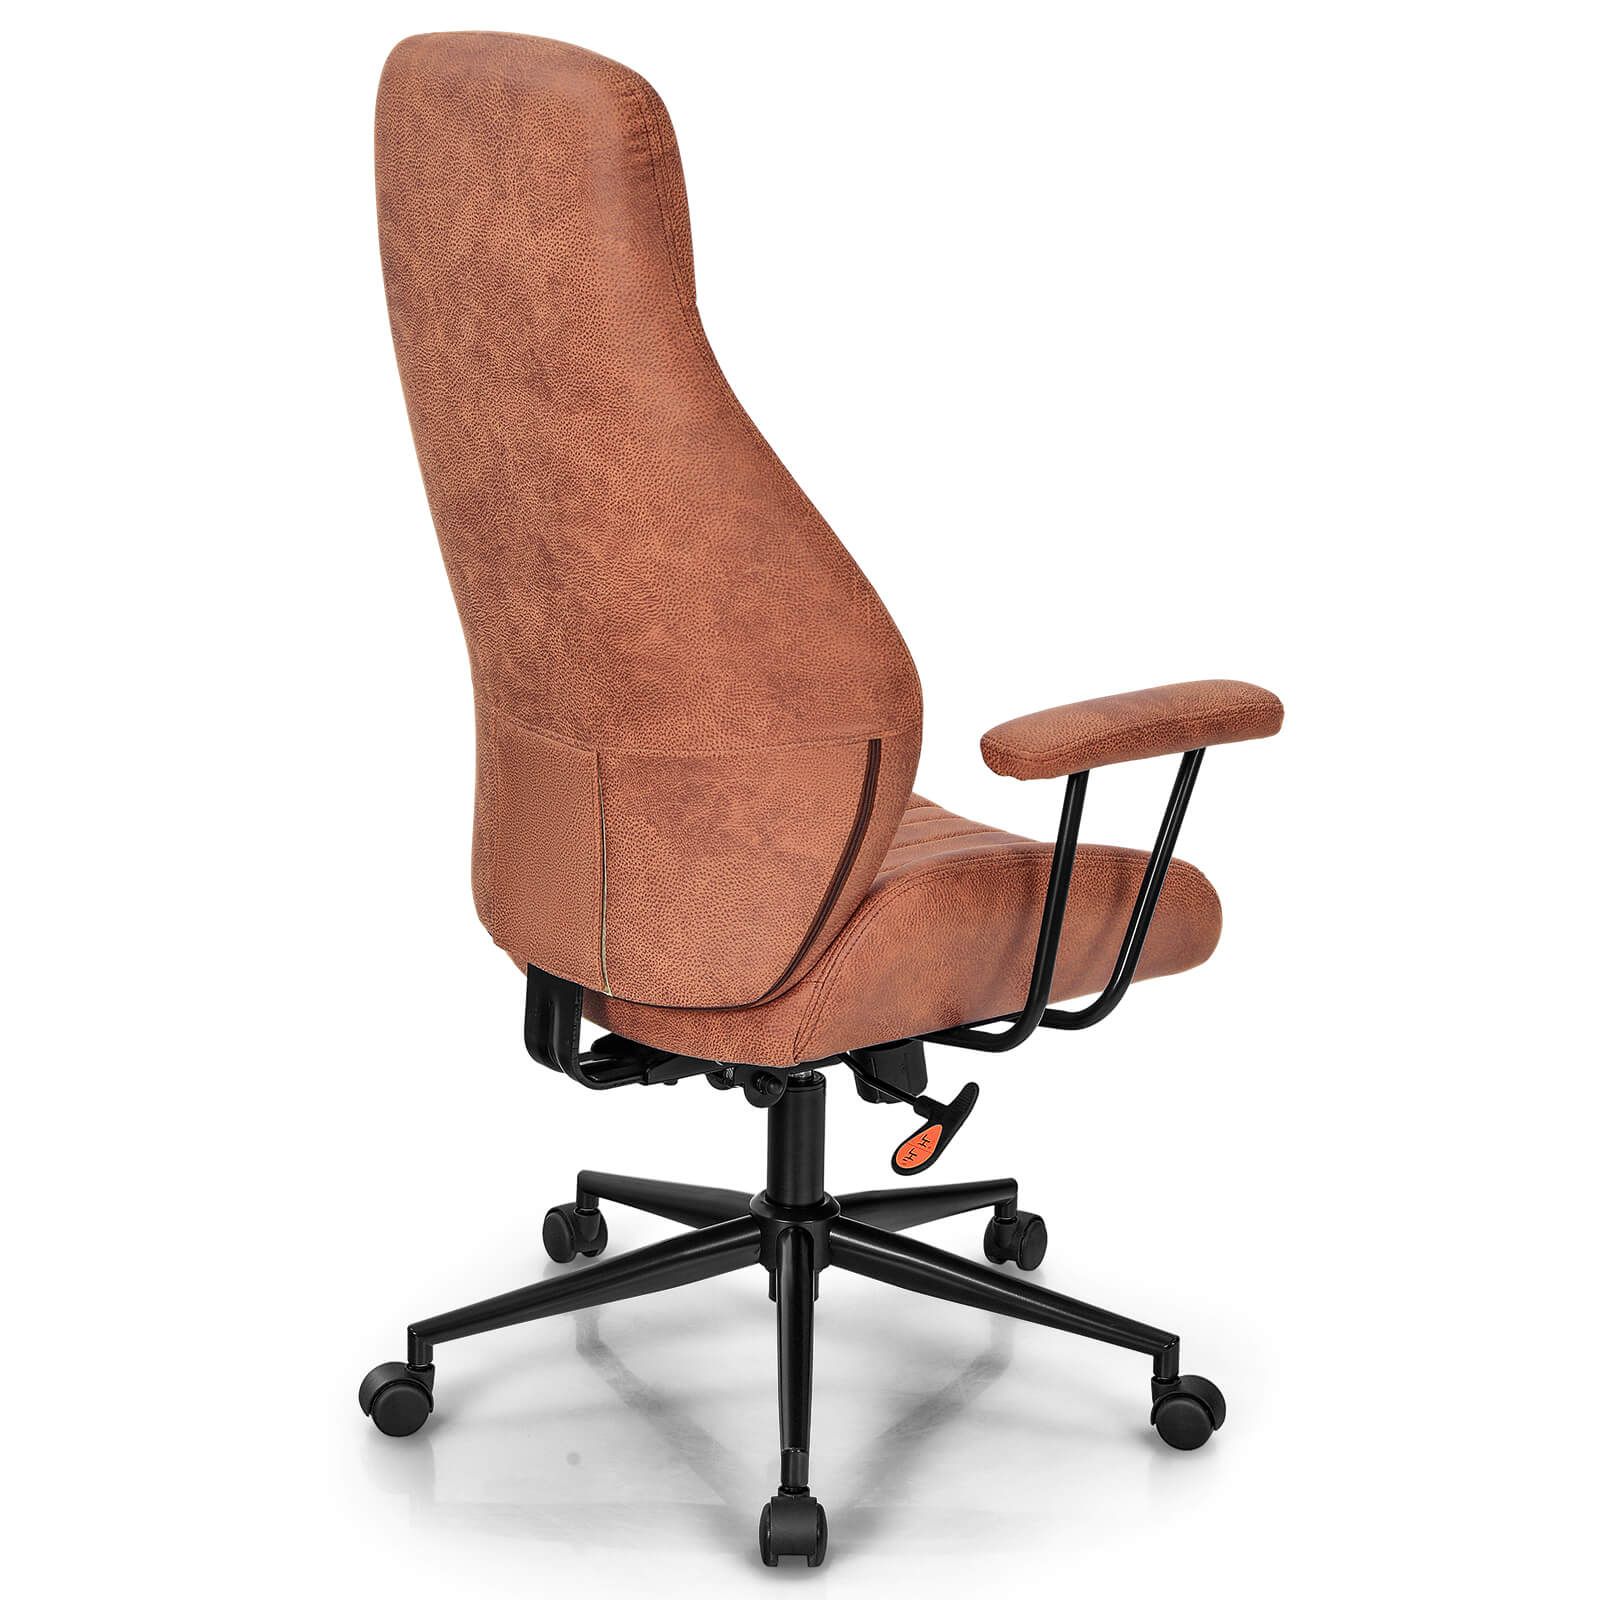 Adjustable Suede Fabric Ergonomic Office Chair with Reclining Backrest